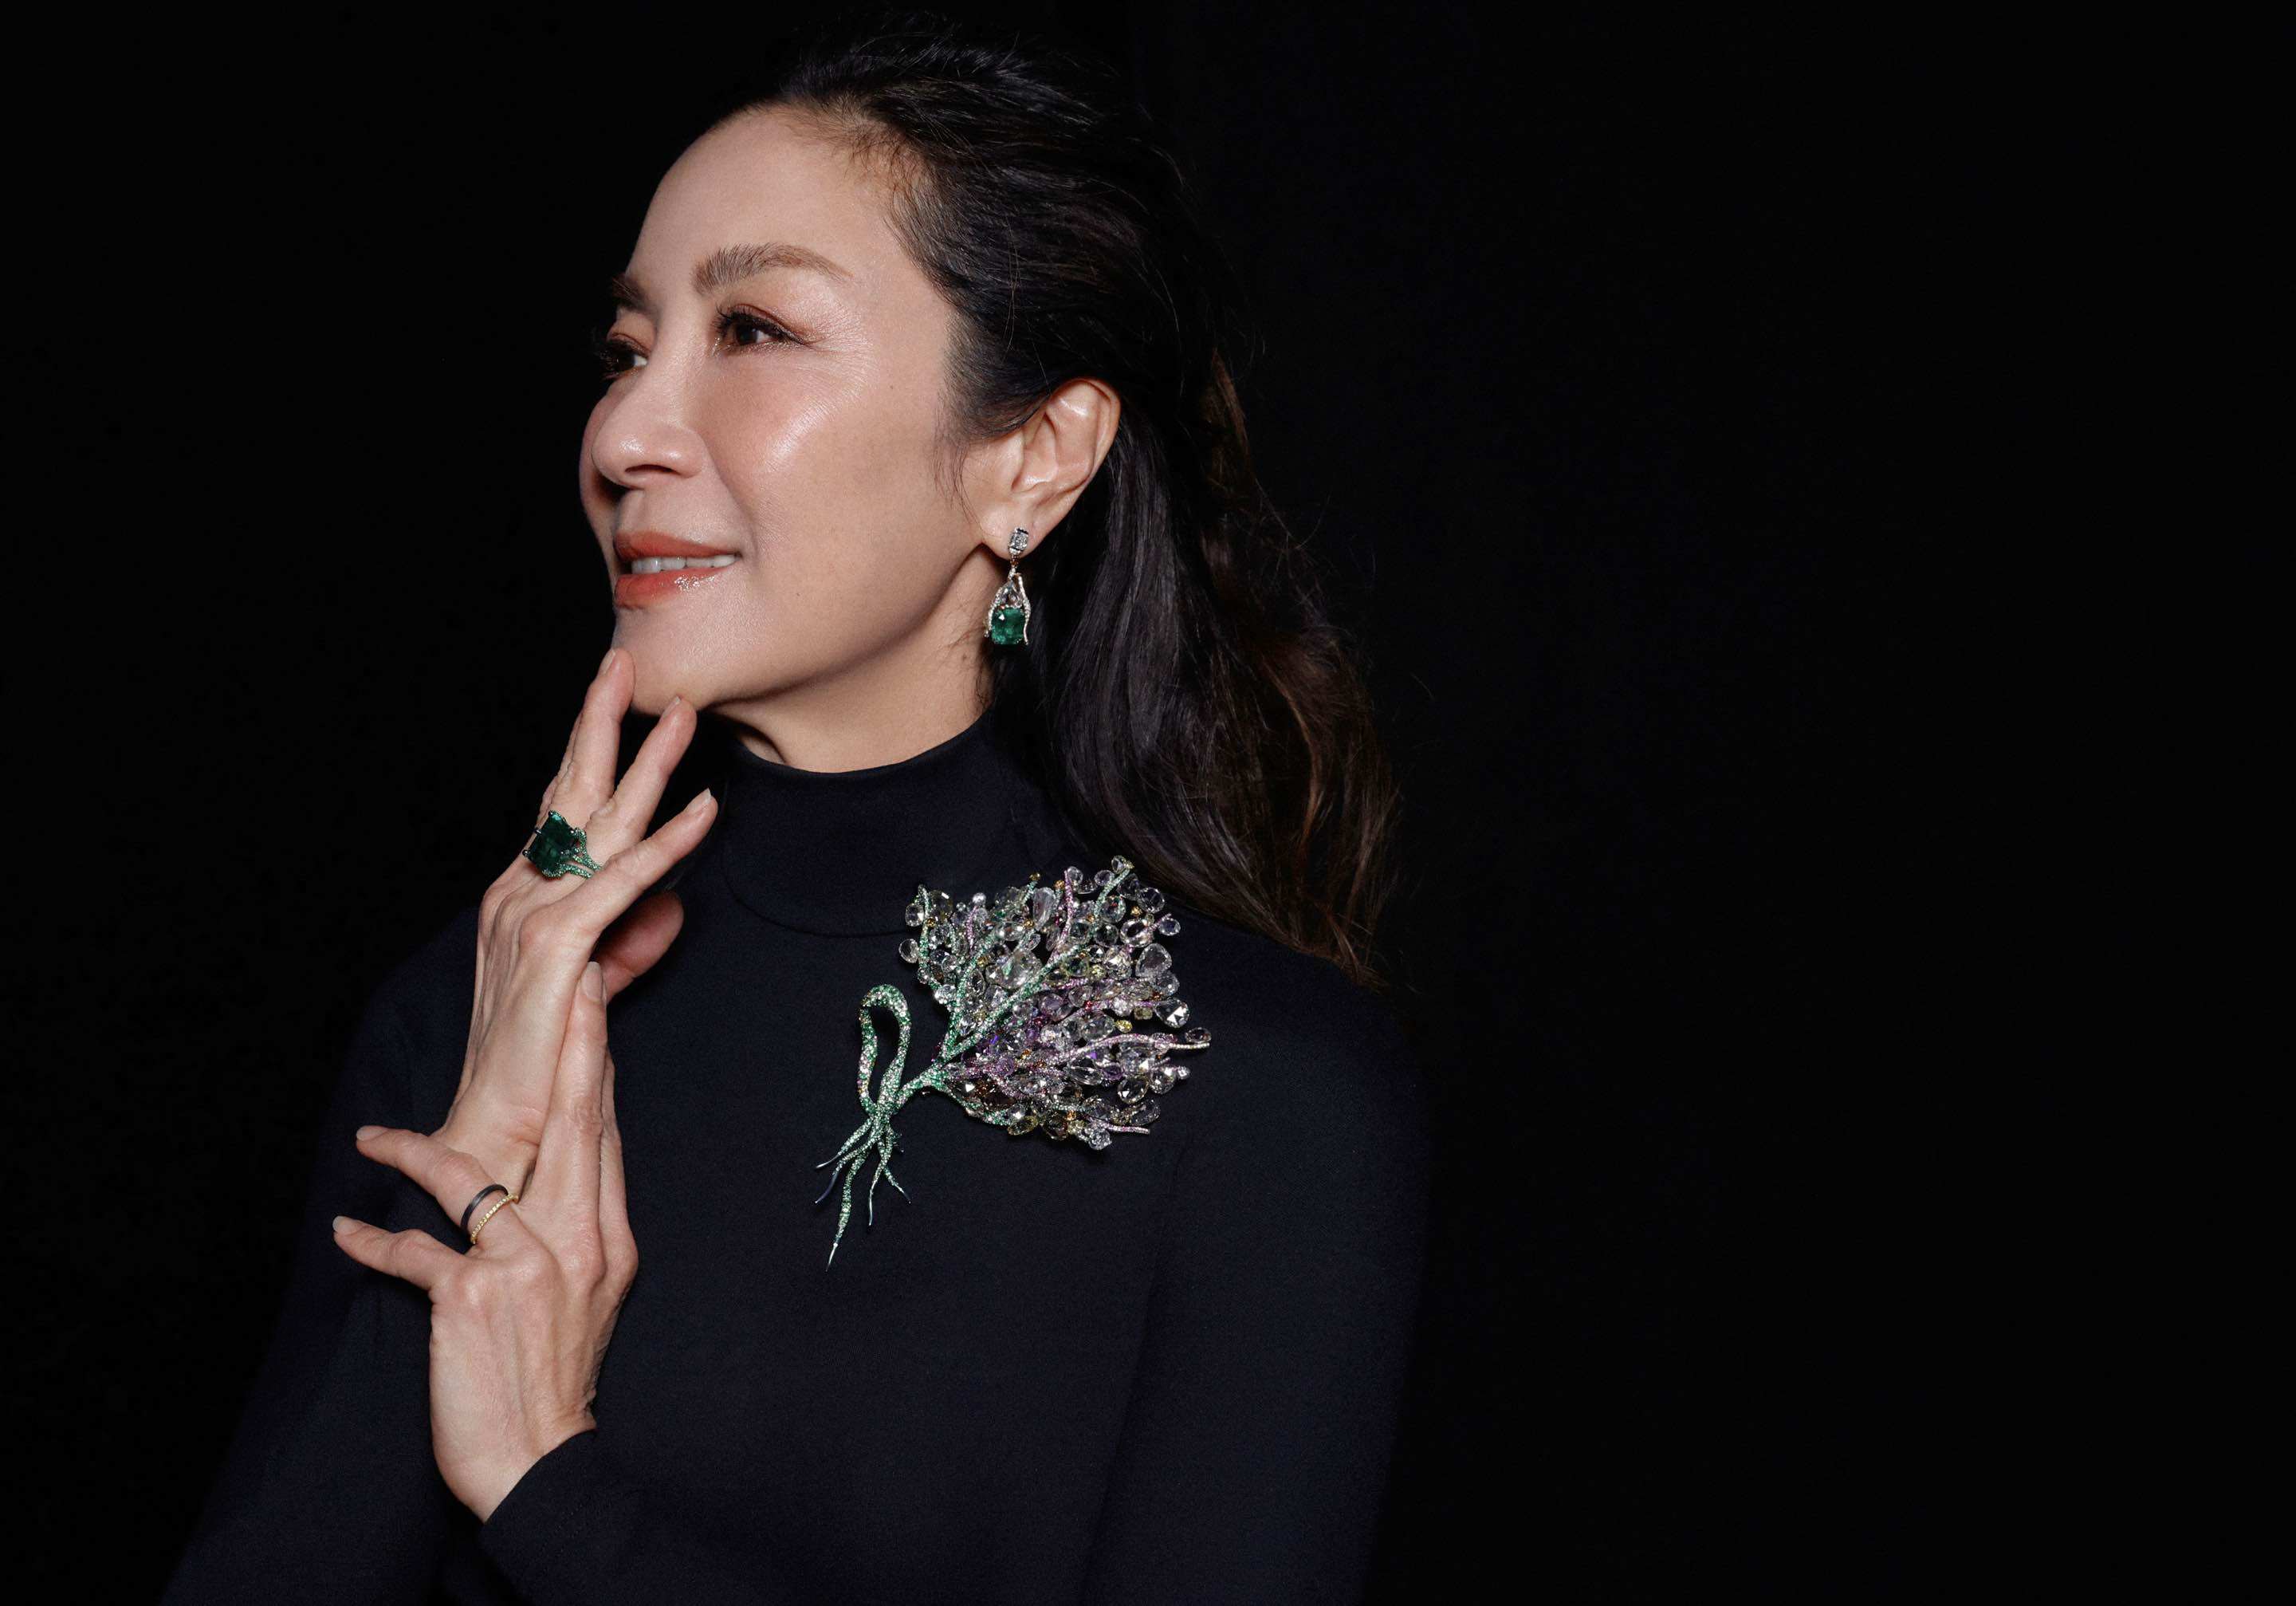 Michelle Yeoh wears the Pamir brooch from Cindy Chao’s Black Label Masterpiece collection. Photos: Handout